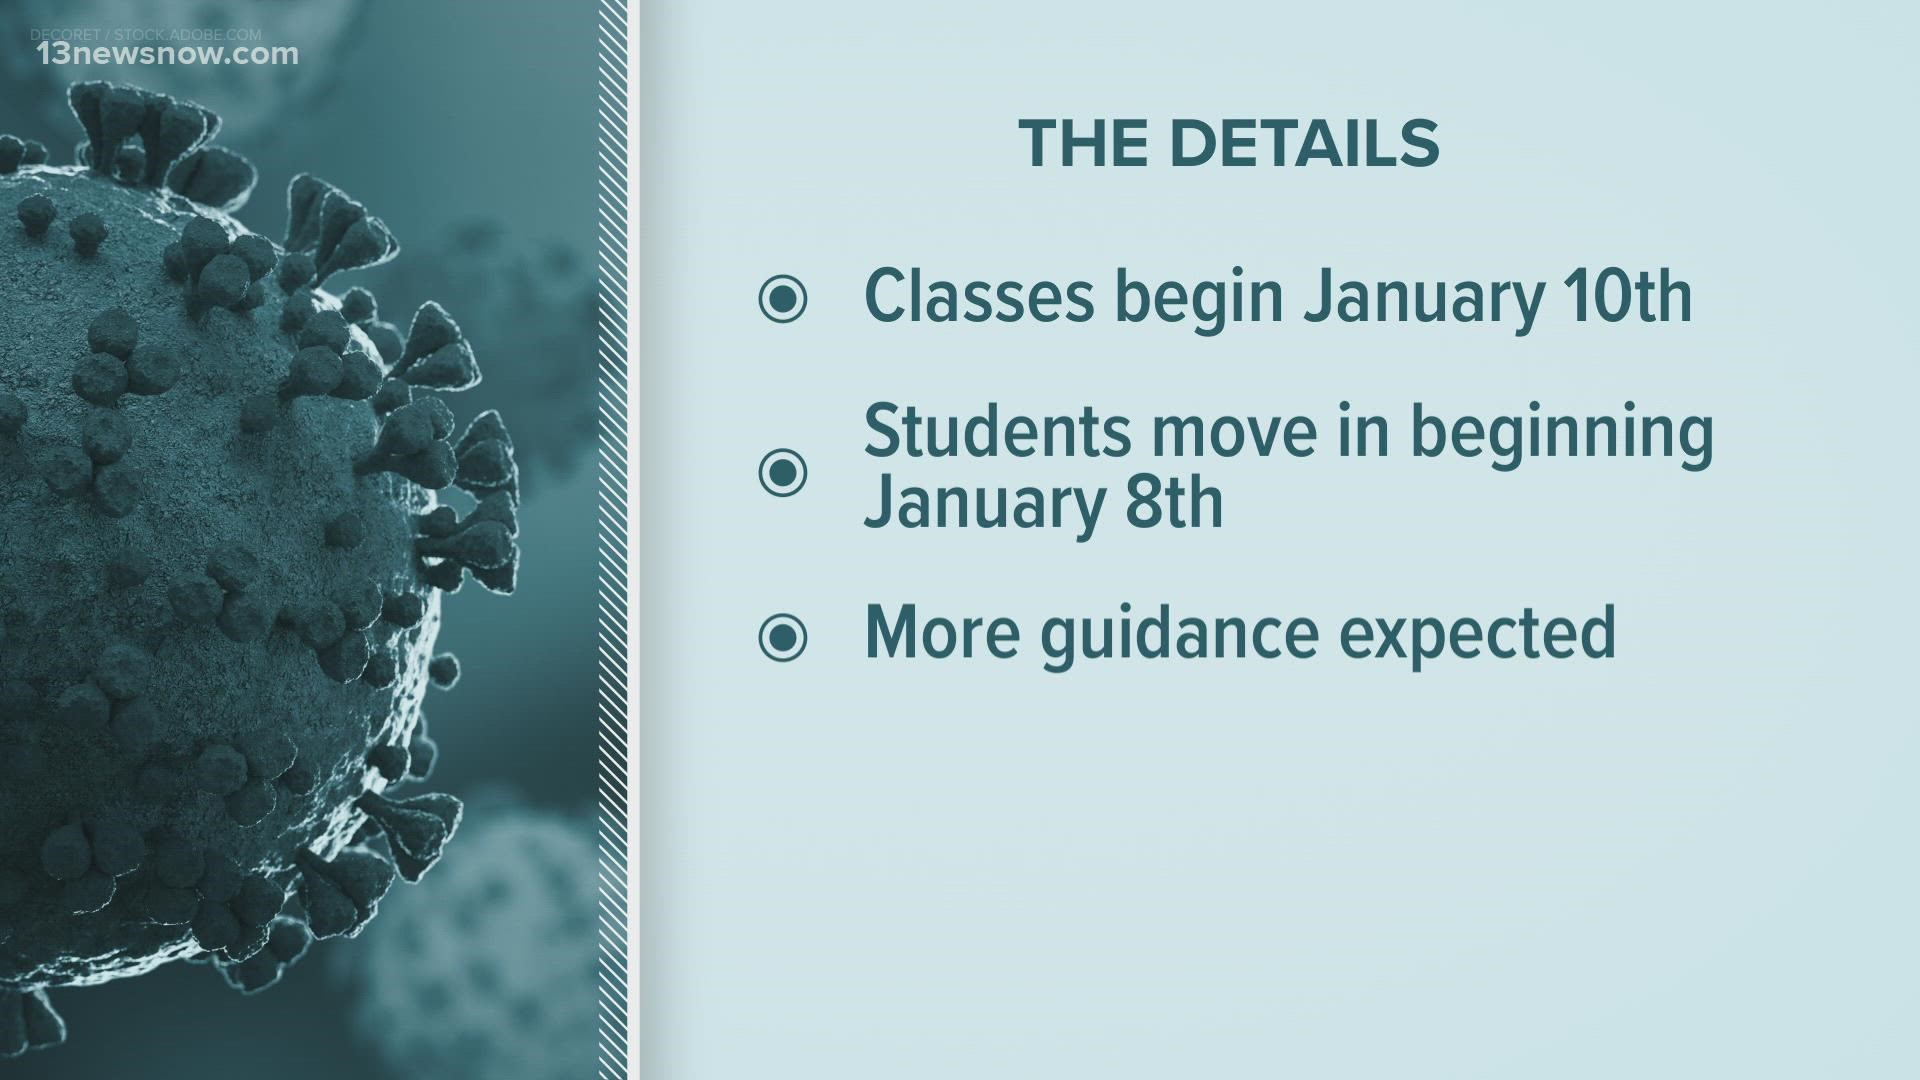 The start of its spring semester will be pushed back to Jan. 10 to avoid the spread of COVID-19. The original start of the spring semester was supposed to be Jan. 5.